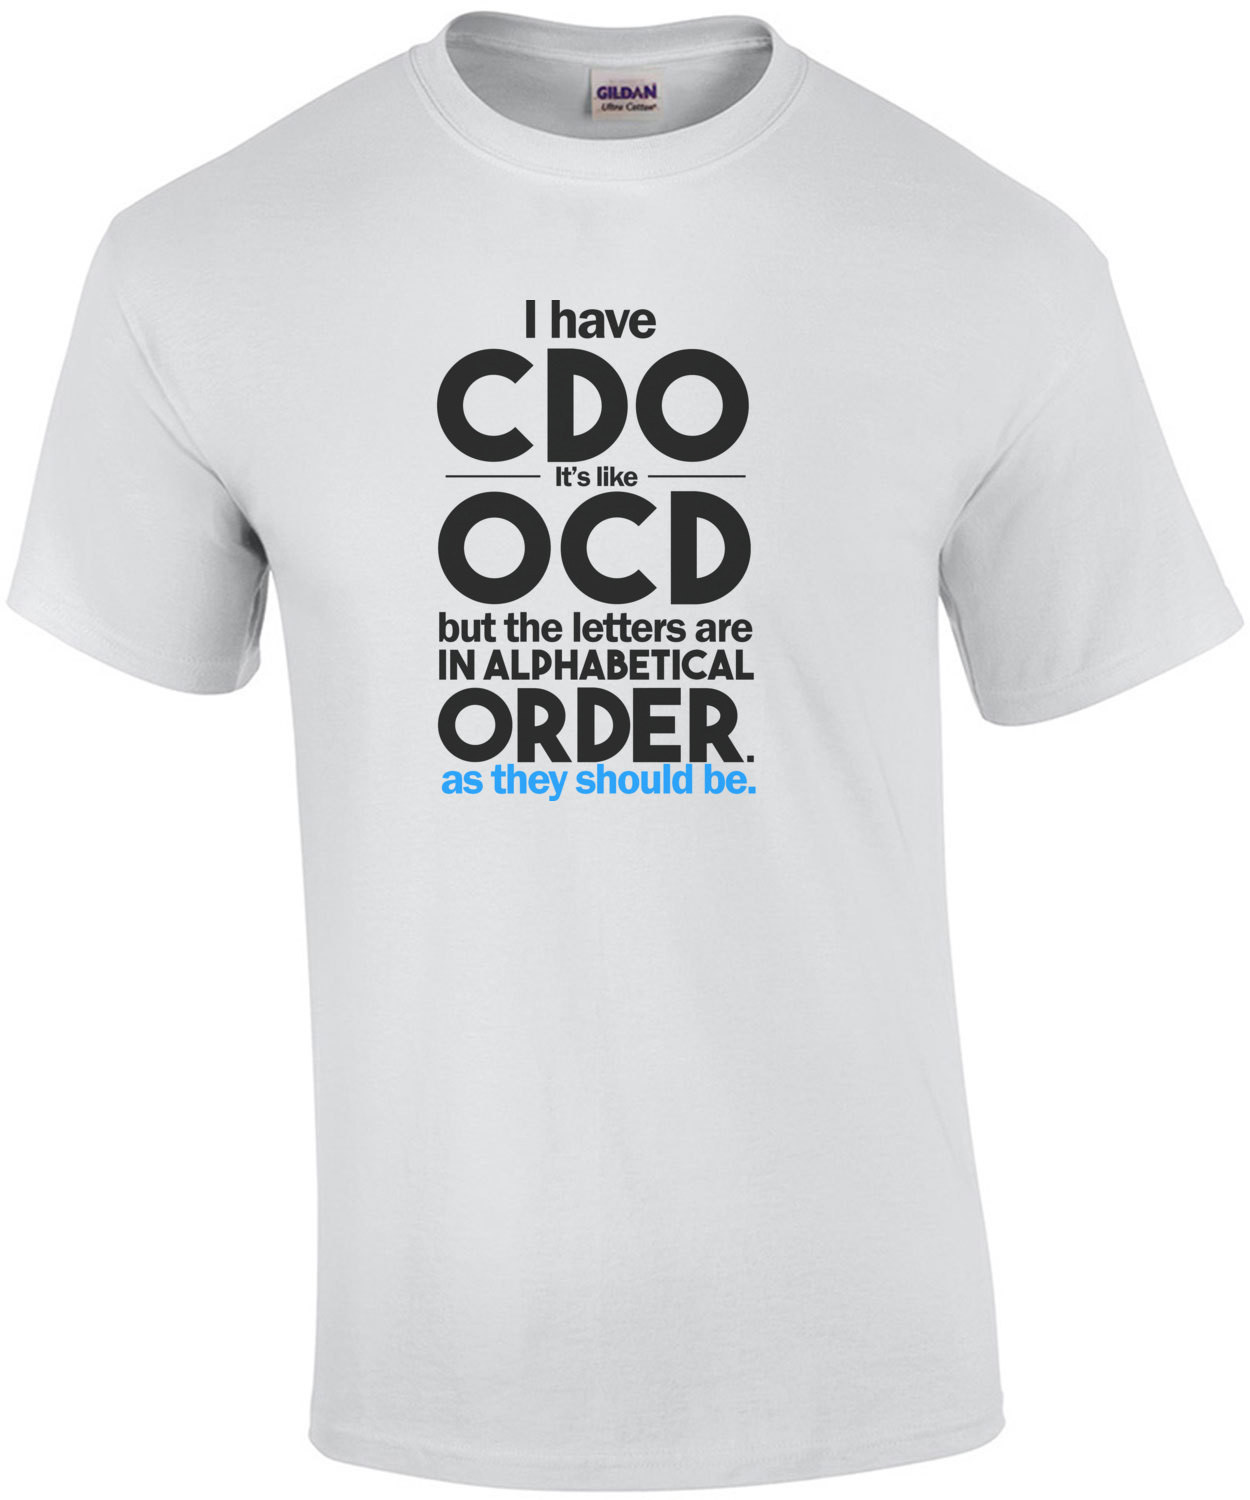 I have CDO. It's a lot like OCD but all the letters are in alphabetical order as they should be!